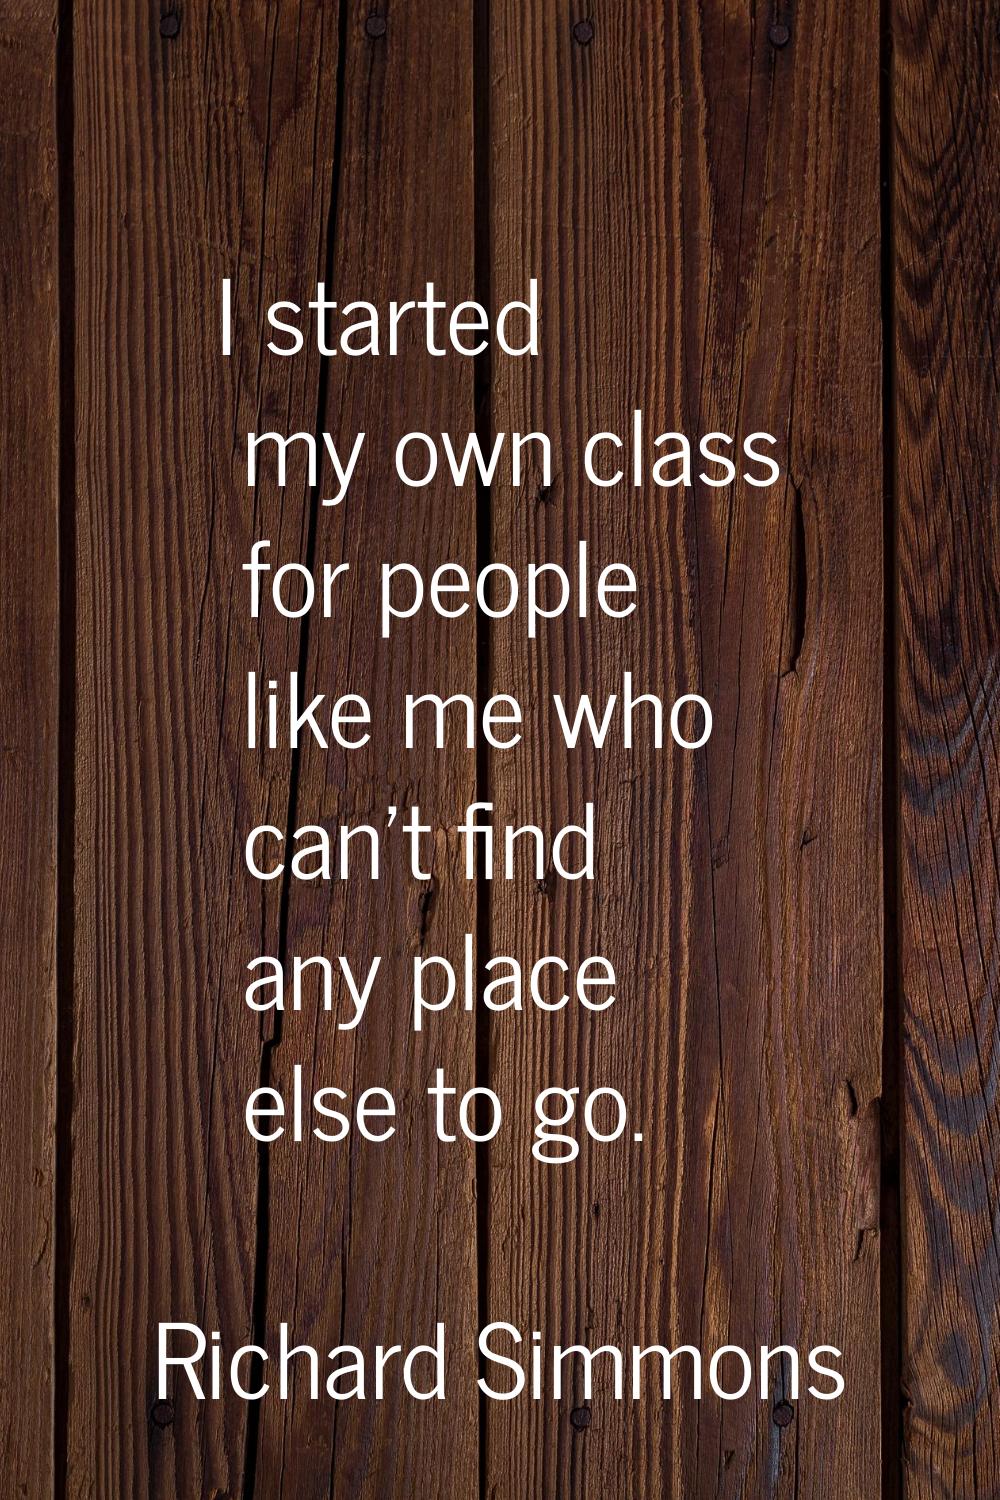 I started my own class for people like me who can't find any place else to go.